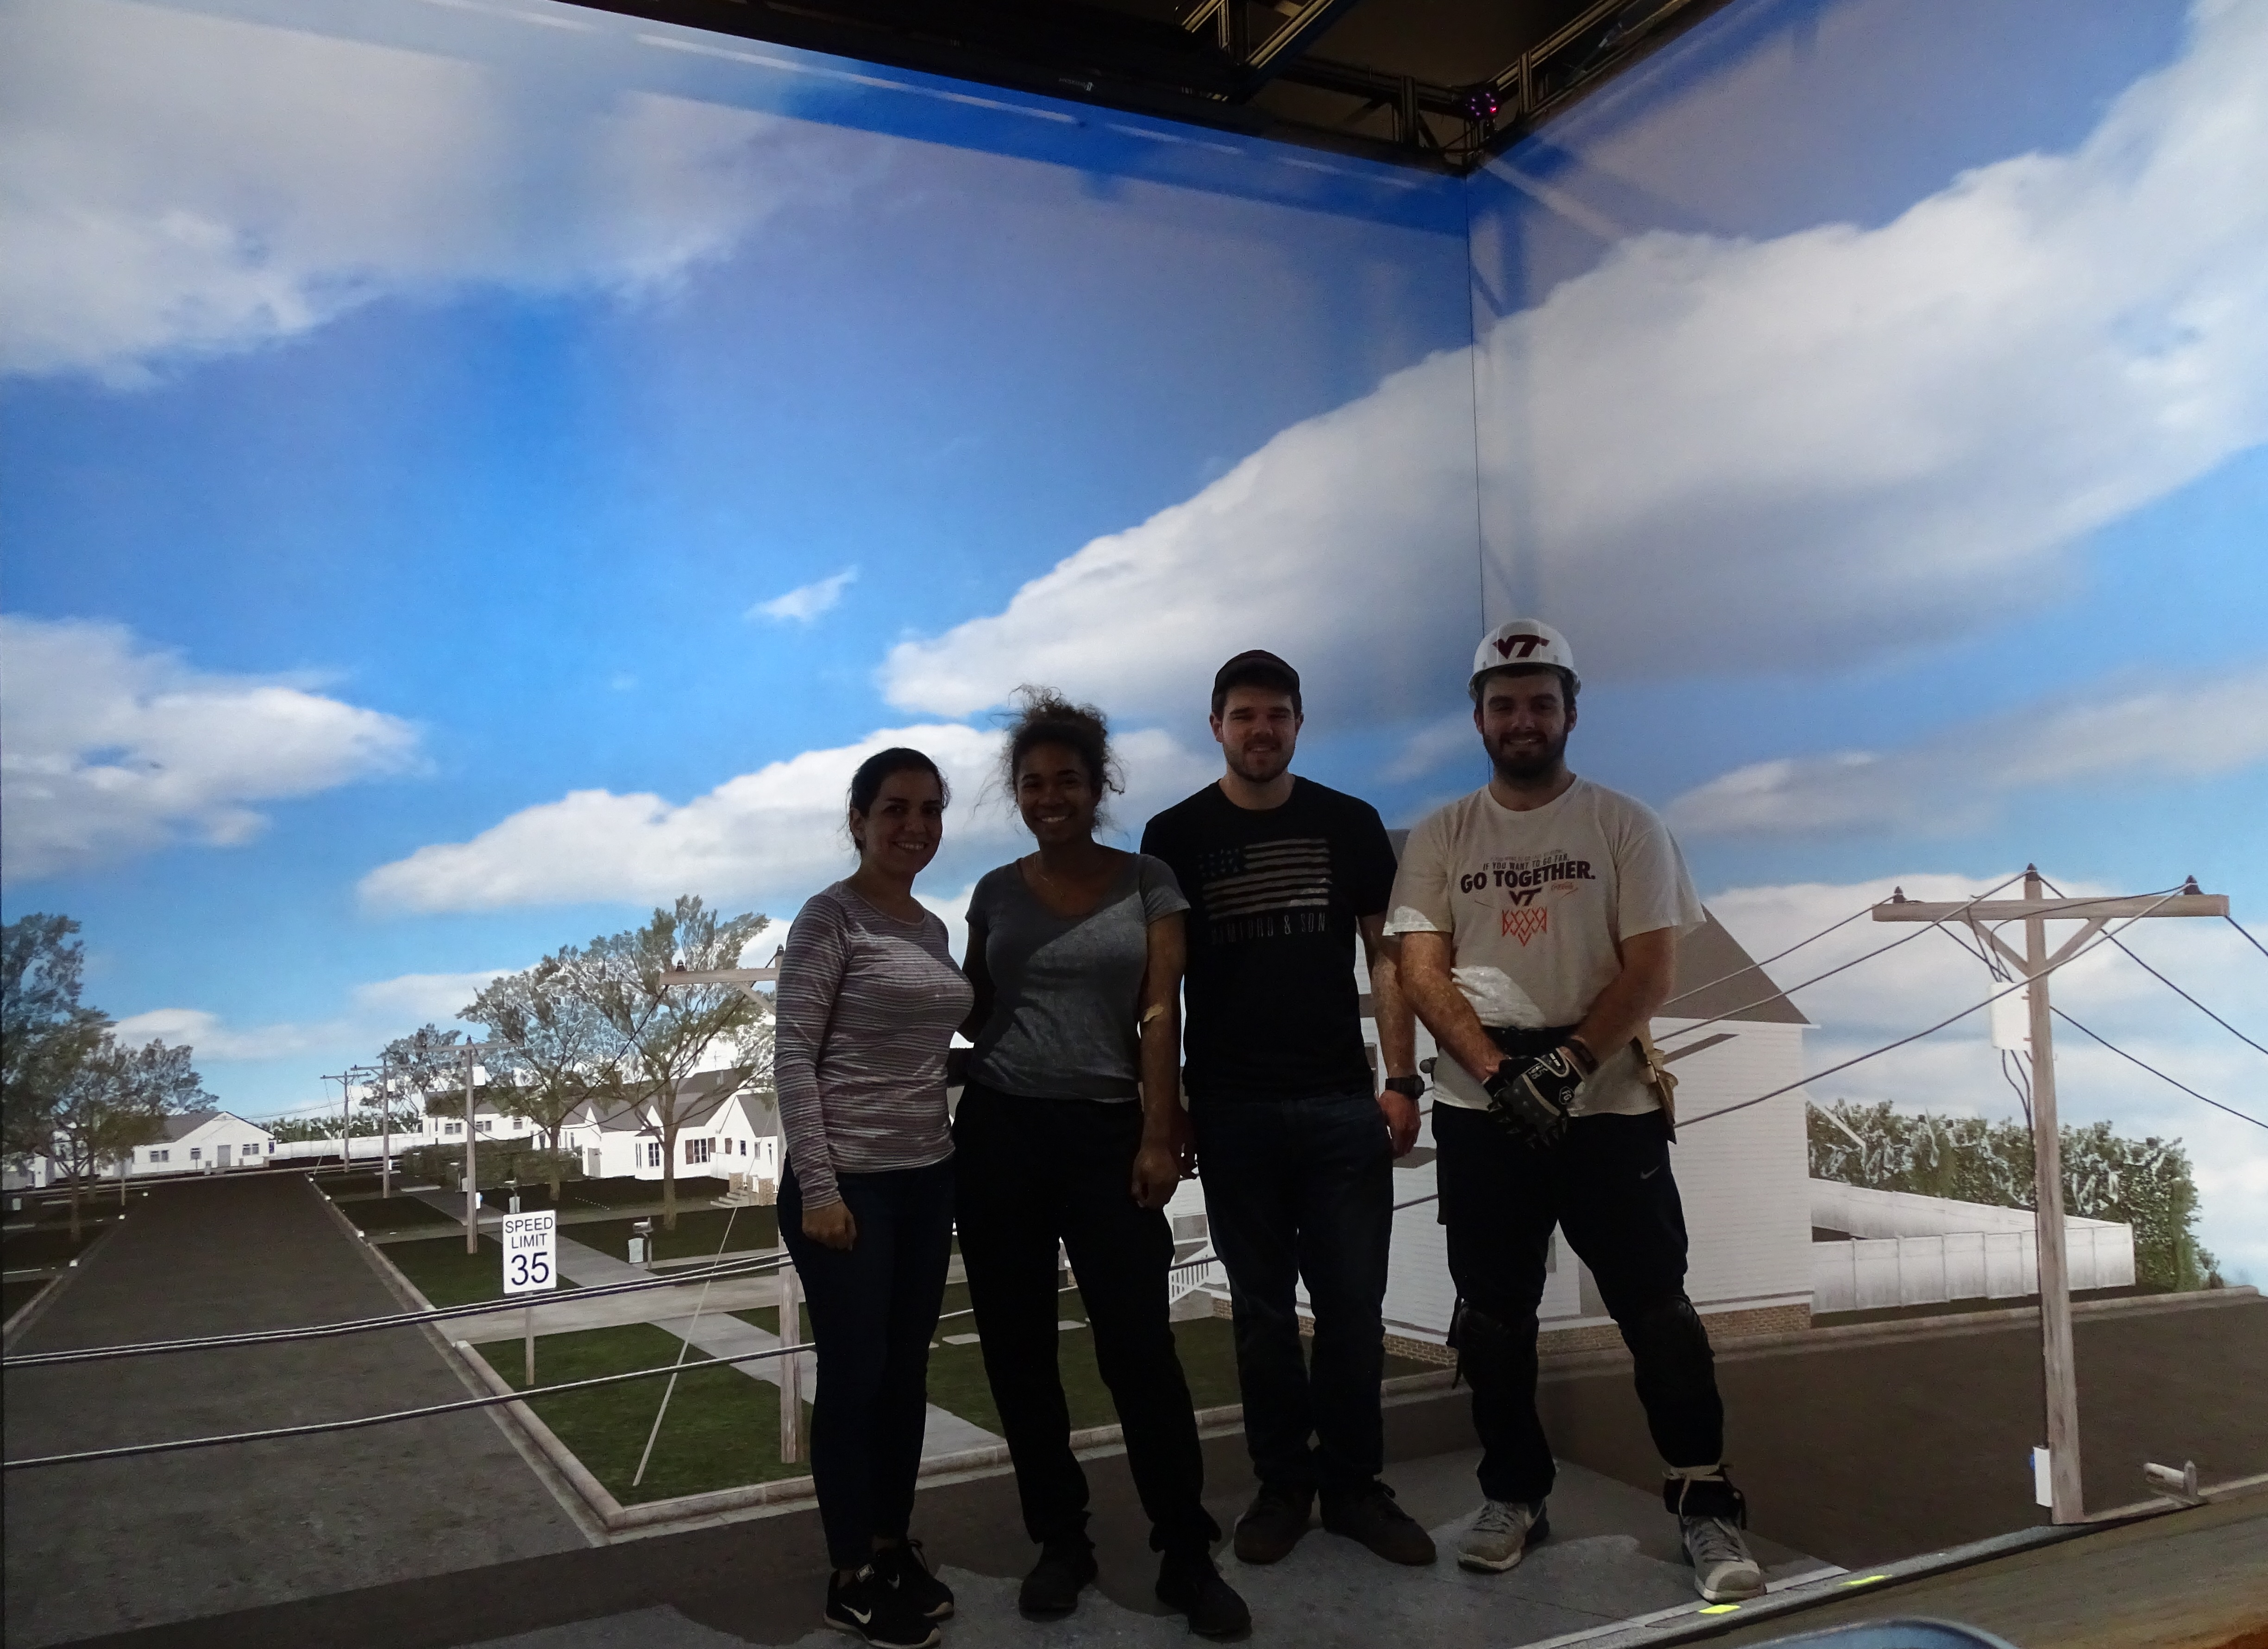 This photo shows two young women and two young men in a virtual reality environment showing blue sky, clouds, electric lines, houses, and trees.